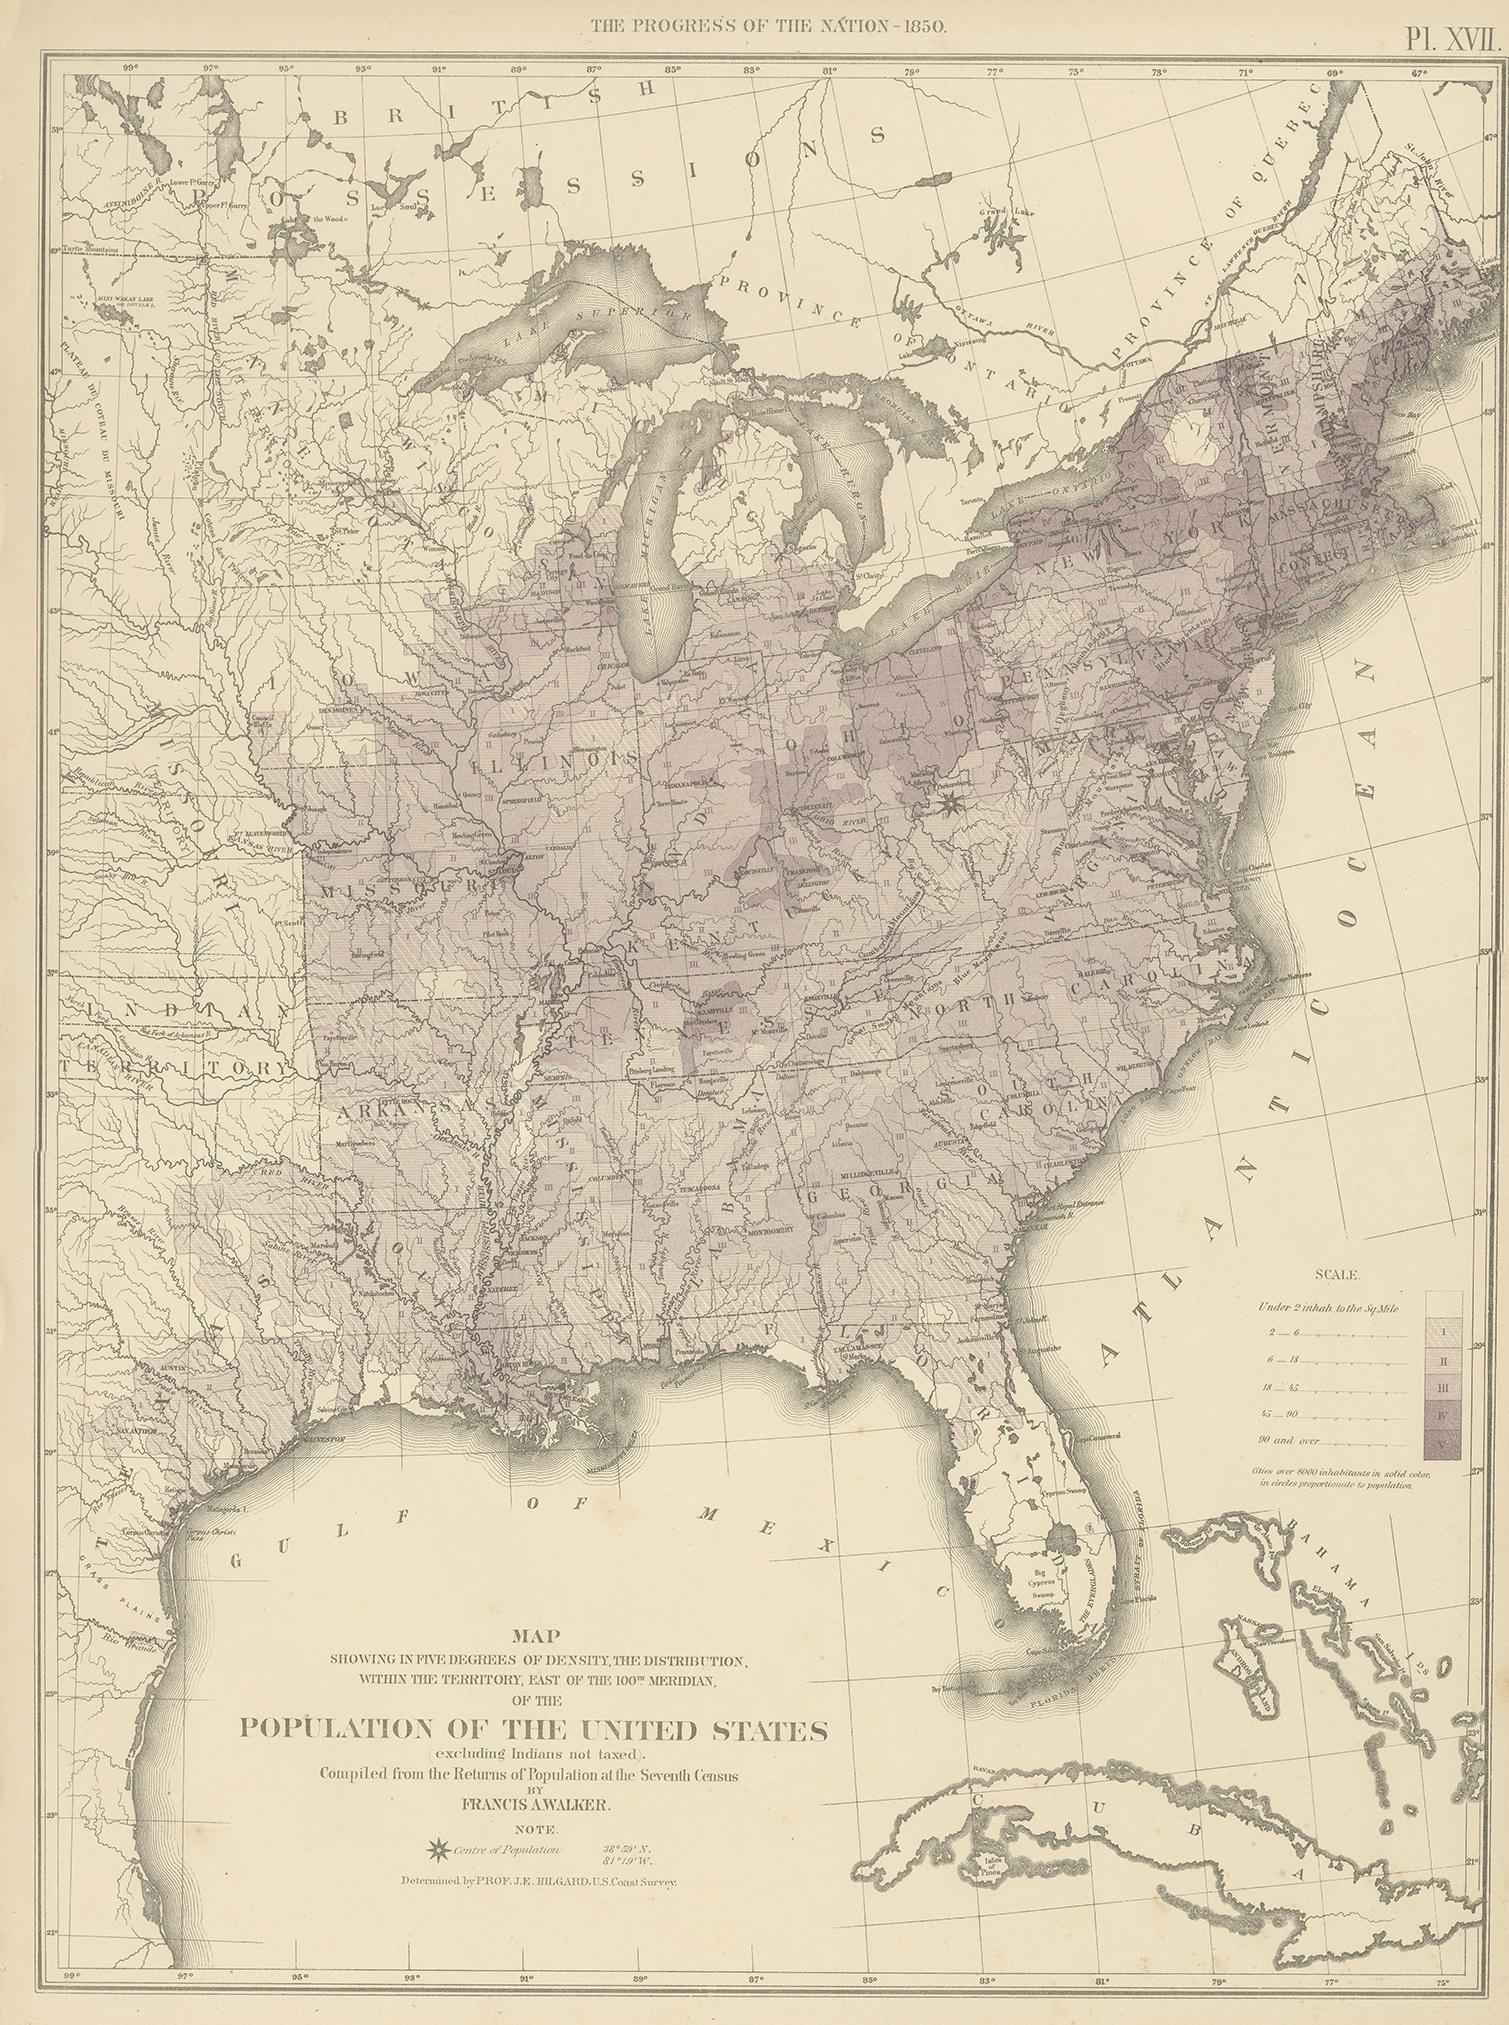 Antique chart titled 'Map showing in five degrees of density, the distribution, within the territory east of the 100th Meridian, of the population of the United States, excluding Indians not taxed'. Chart of the US Population 1850. Originates from